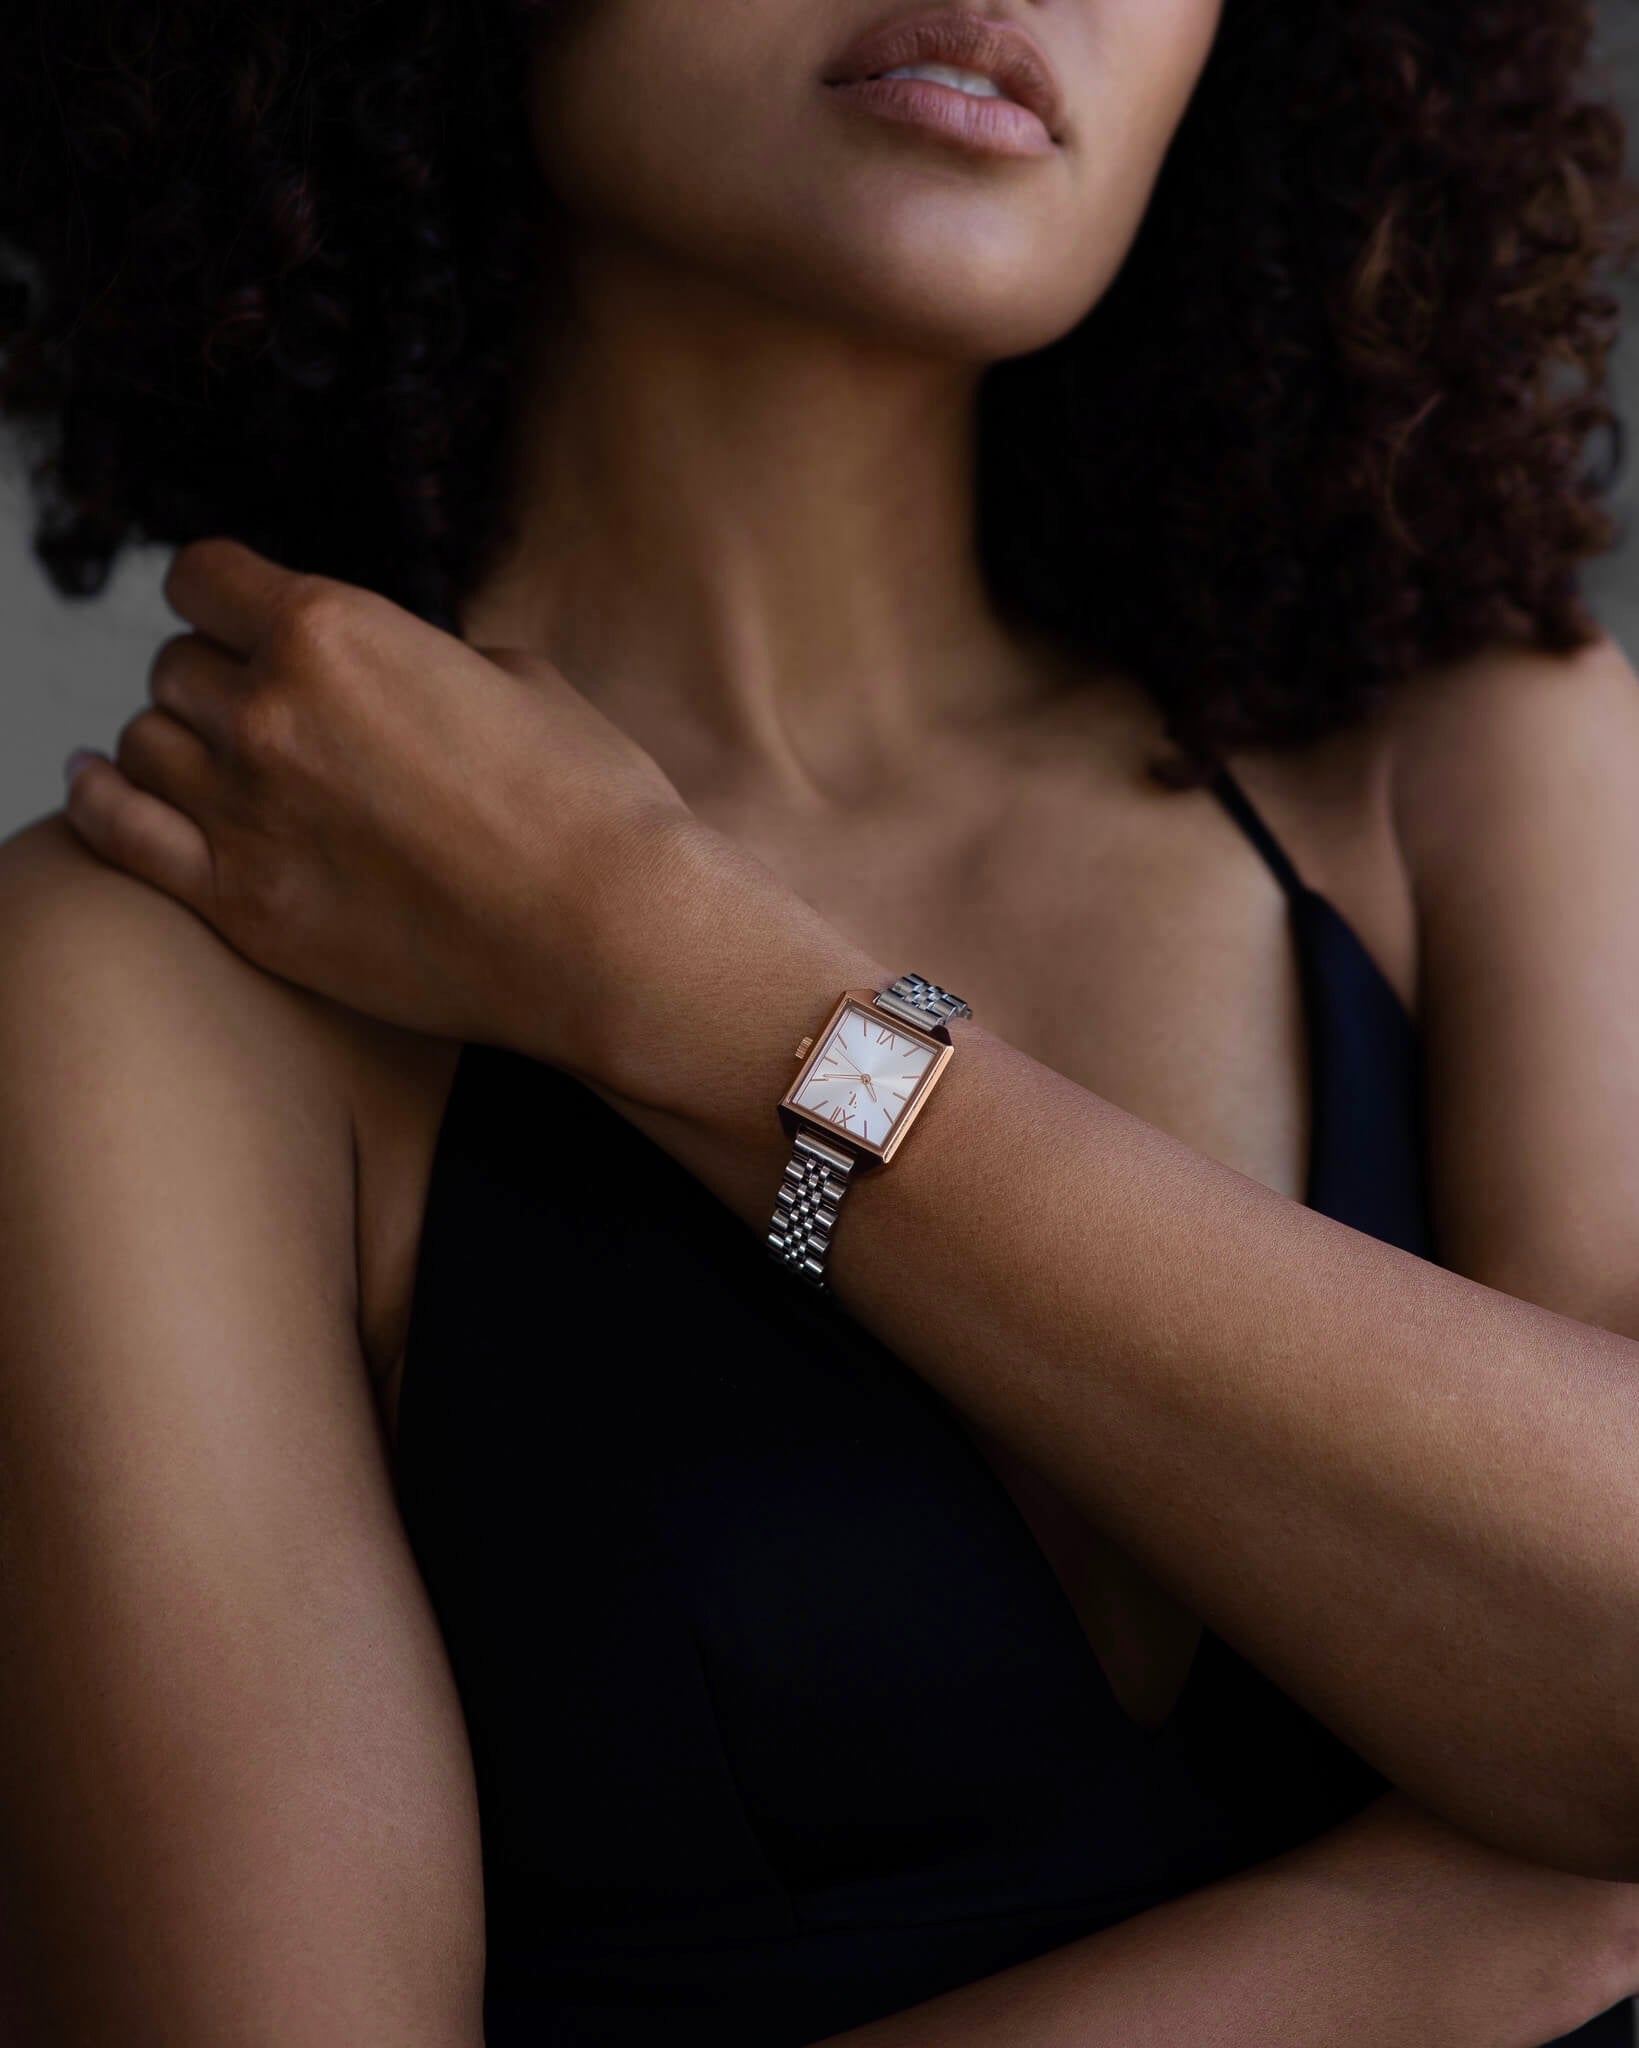 Rosedale designed by Five Jwlry. Discover a square watch for women made of a small silver dial, a case and rose gold hands.